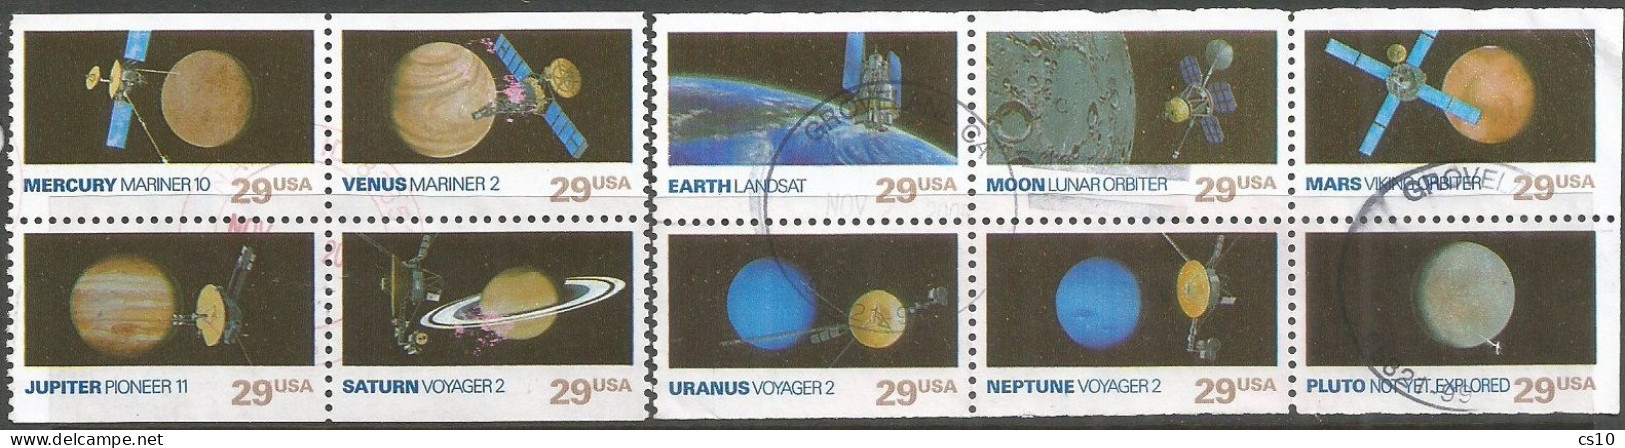 USA 1991 Space Exploration Cpl10v Set In #2 Blocks From Booklet Of 4+6pcs In VFU Condition REALLY USED - Annate Complete